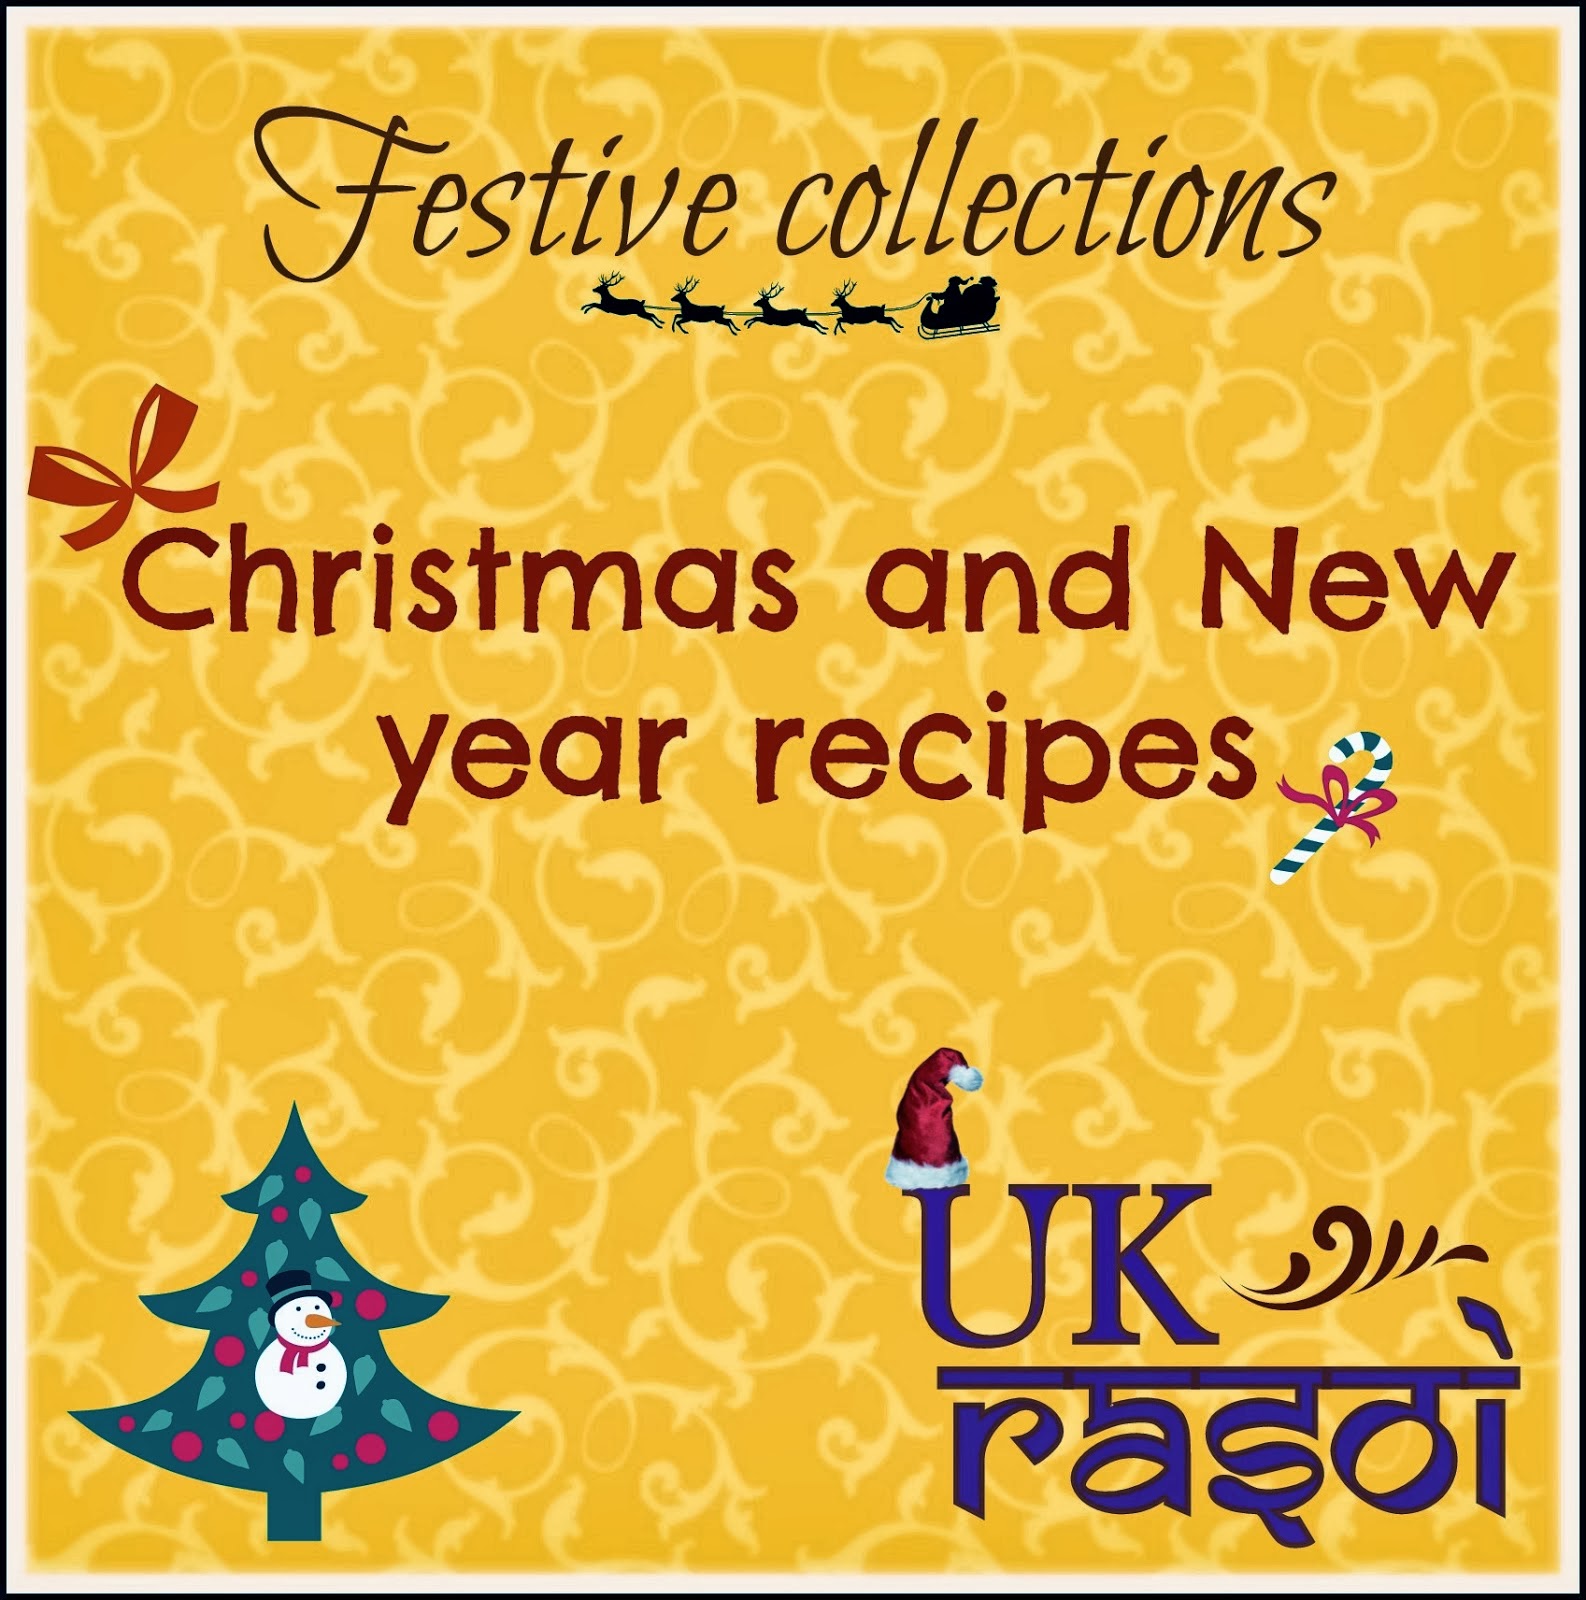 FESTIVE COLLECTIONS